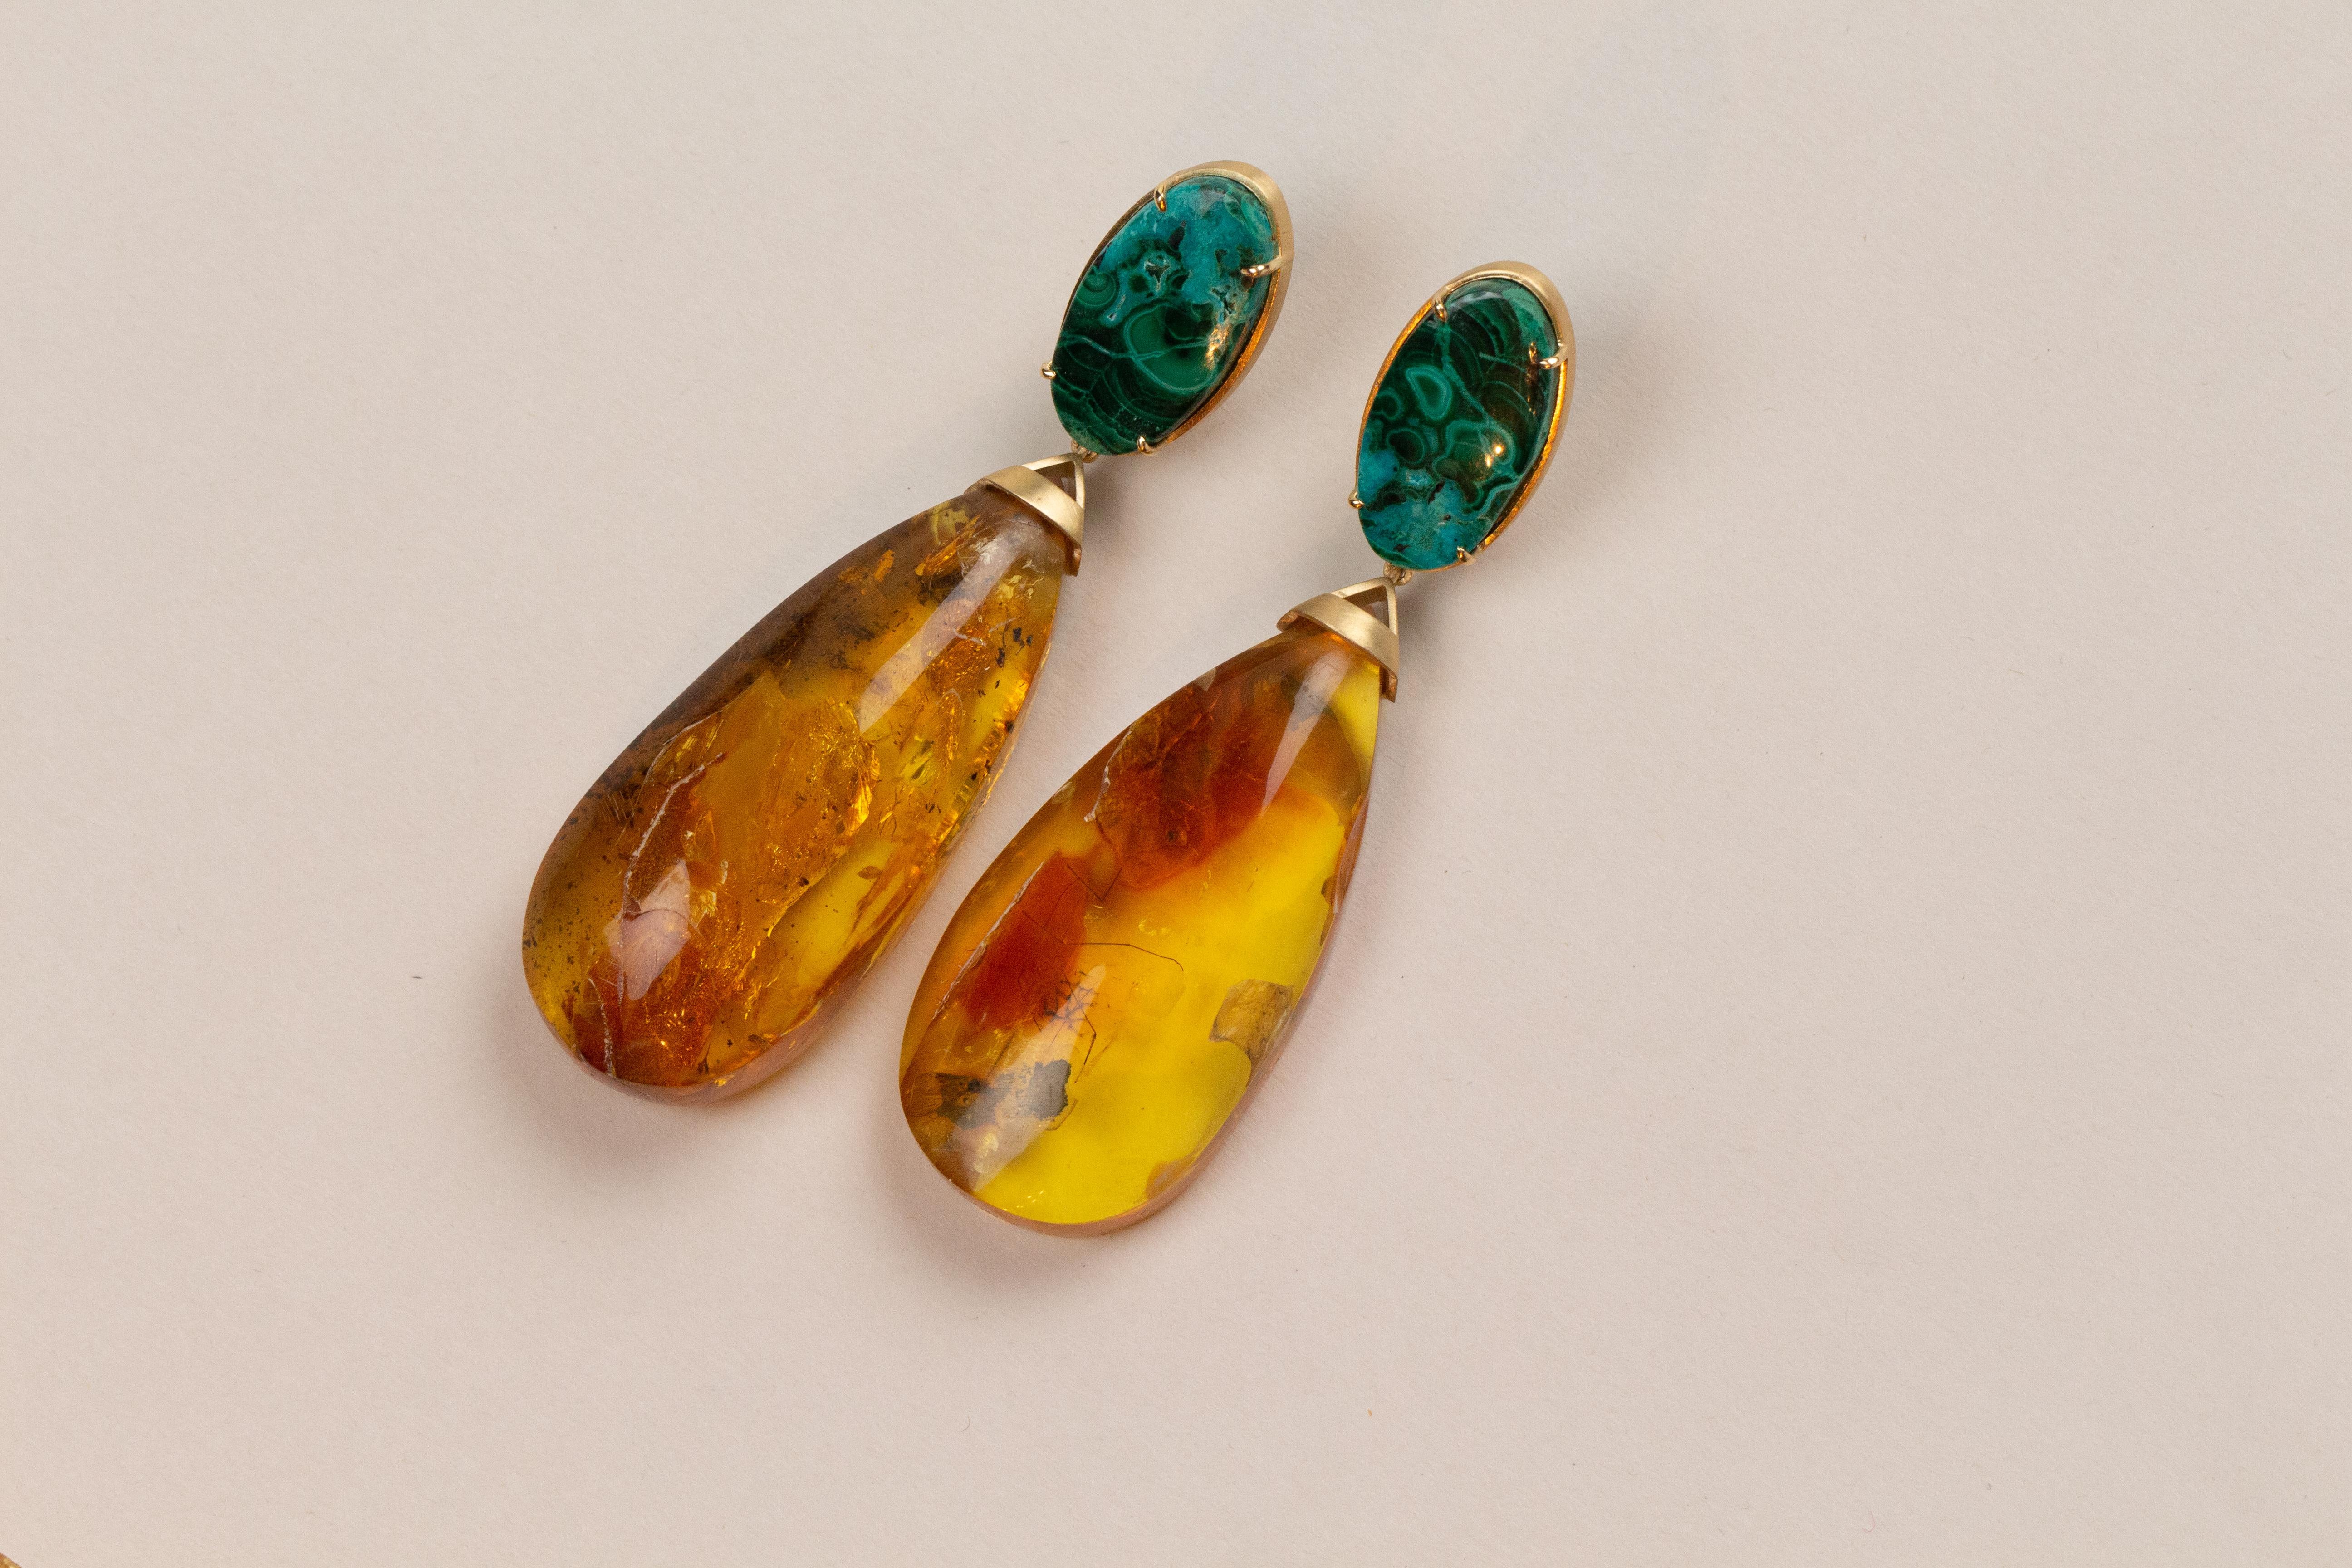 Earrings with  baltic transparent amber  drops and azzurrite linked in gold 24k gr8,90.
All Giulia Colussi jewelry is new and has never been previously owned or worn. Each item will arrive at your door beautifully gift wrapped in our boxes, put